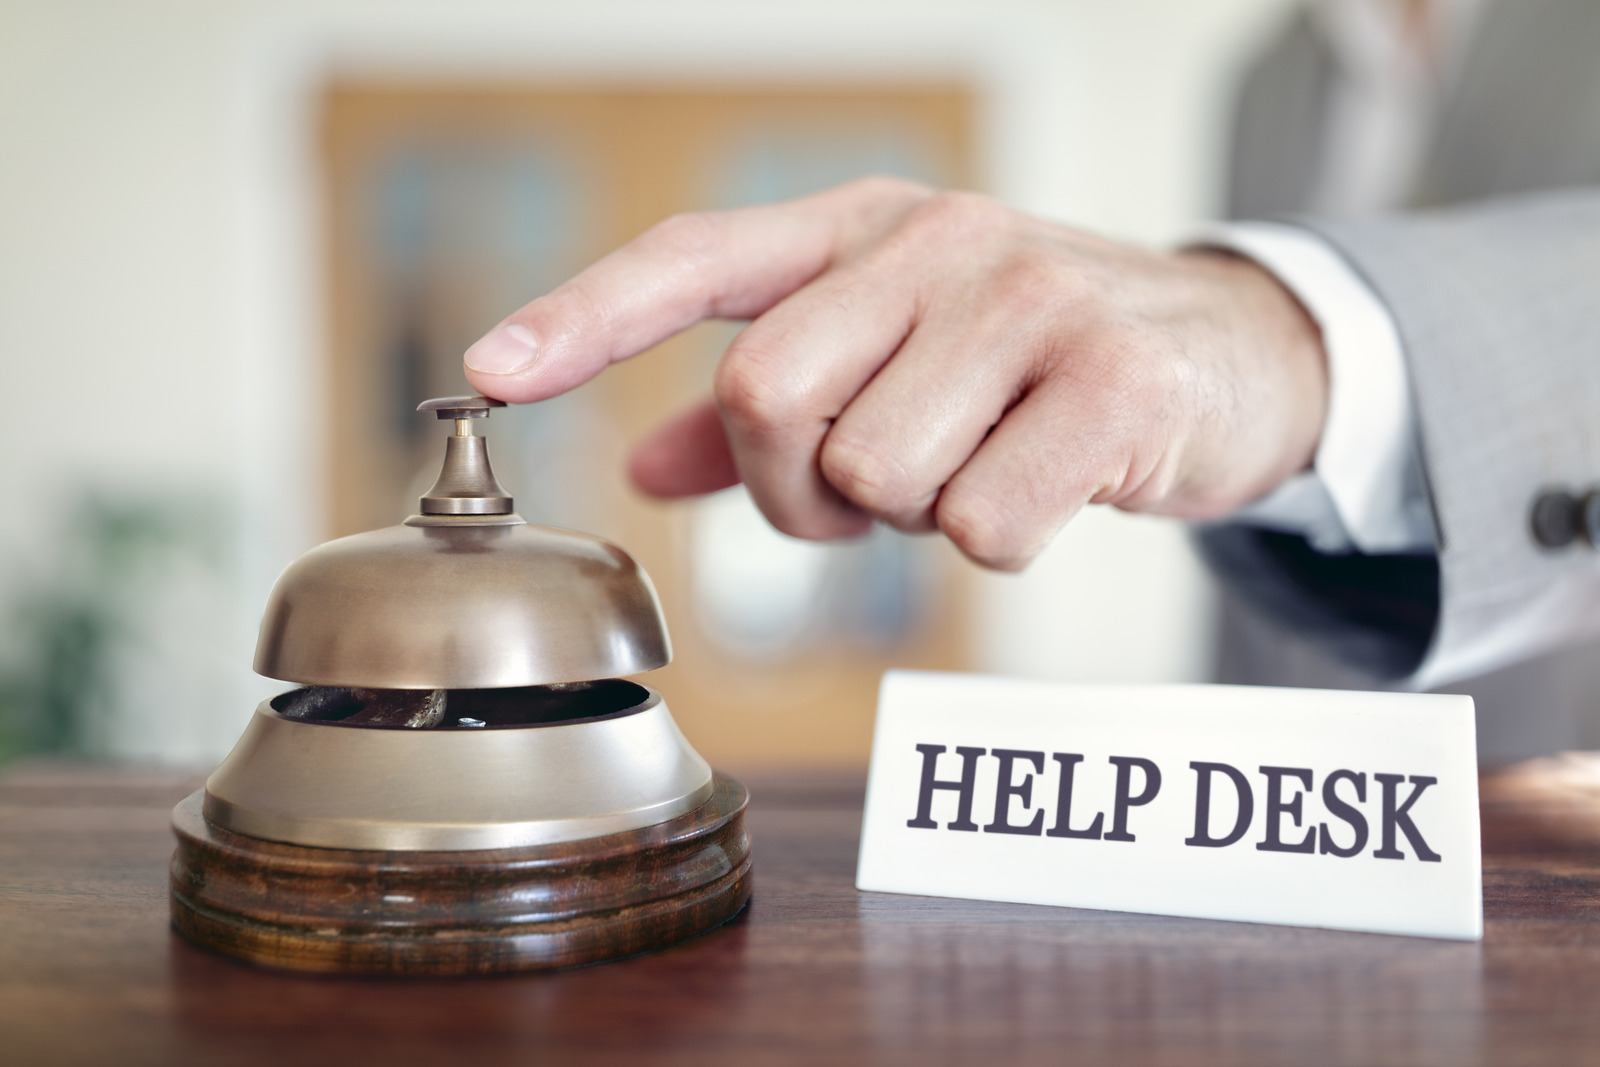 Significance of using help desk software